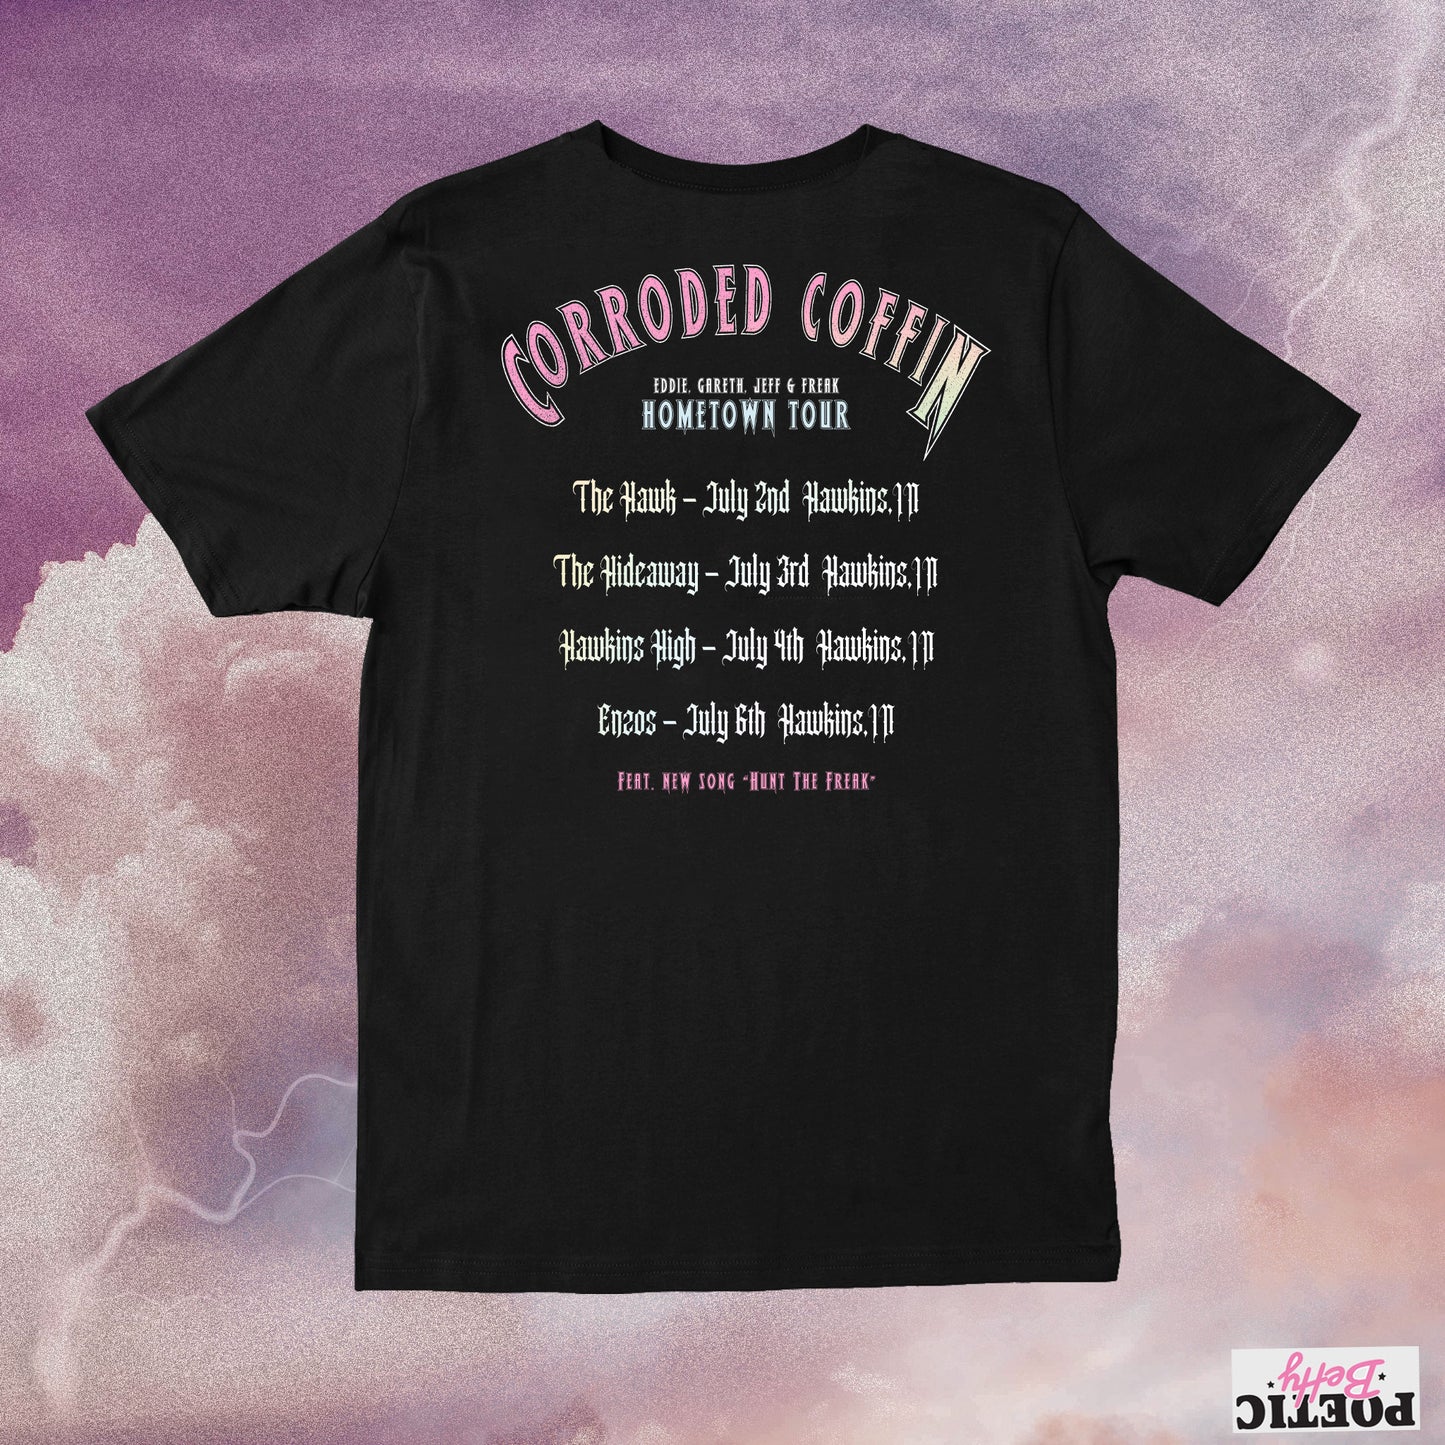 Corroded Coffin 80s Unisex Band T-Shirt